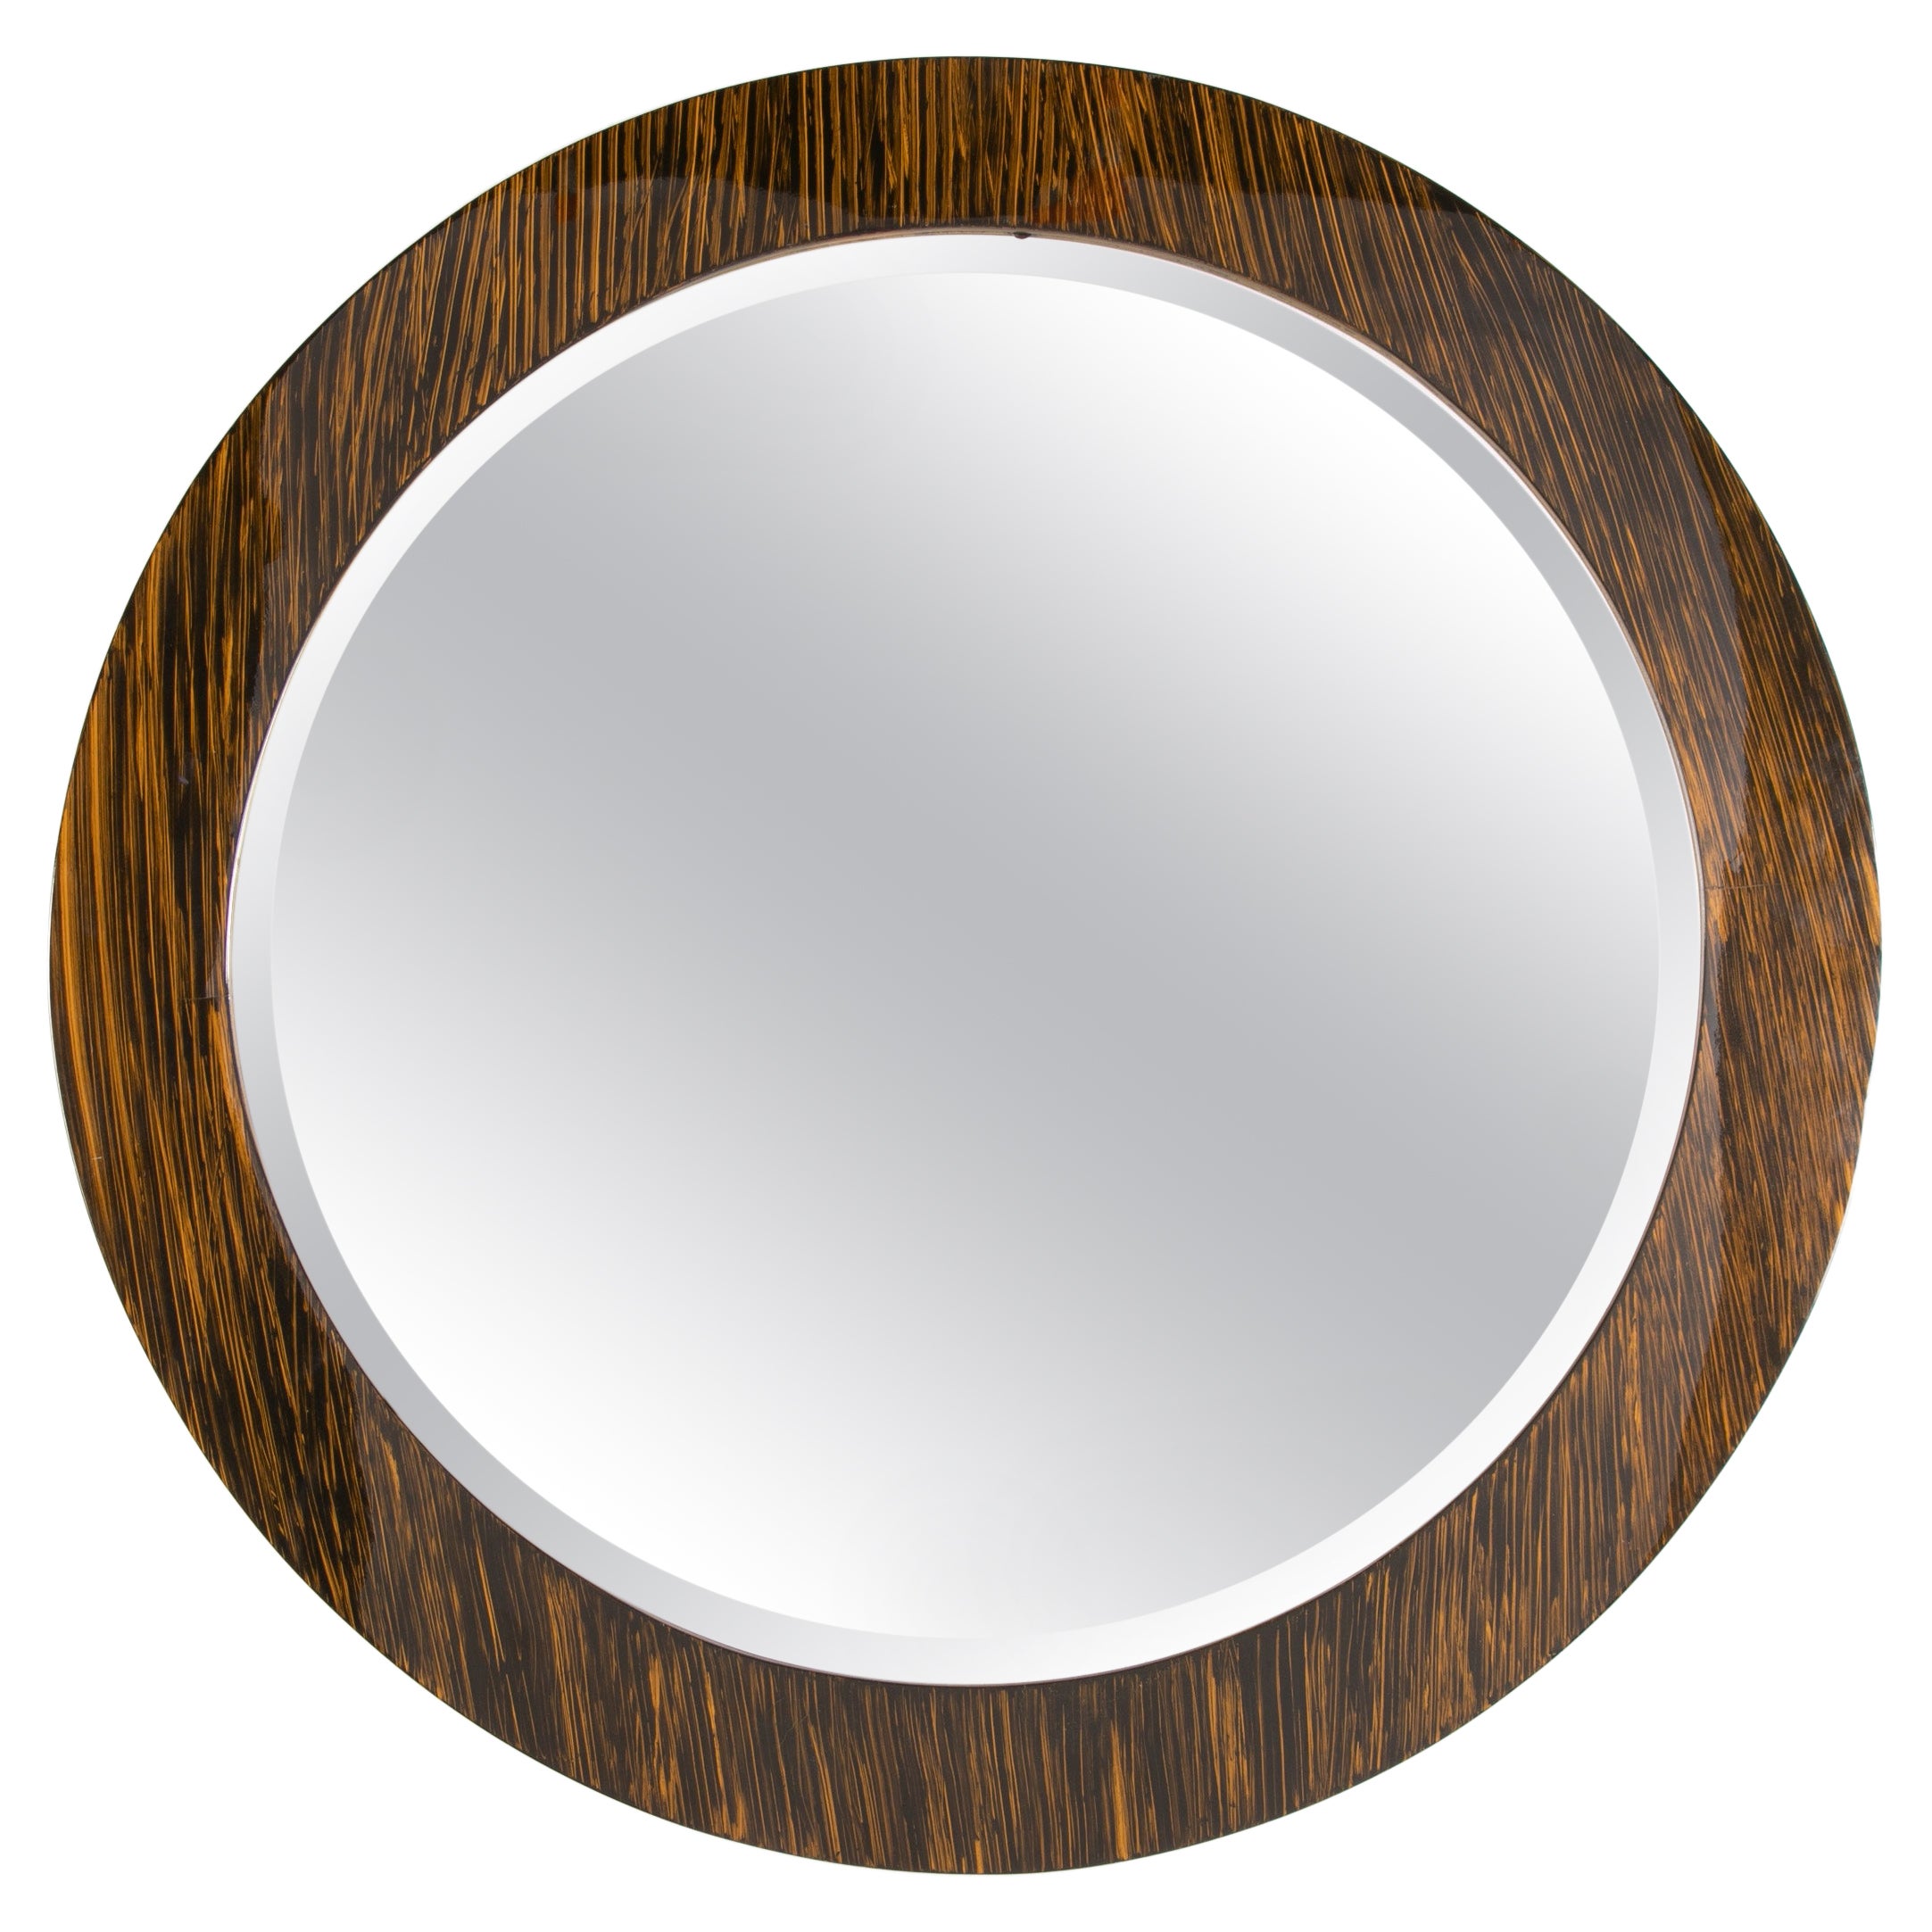 Karl Springer Style Round Mirror With Faux Tigers Eye Lacquered Finish For Sale